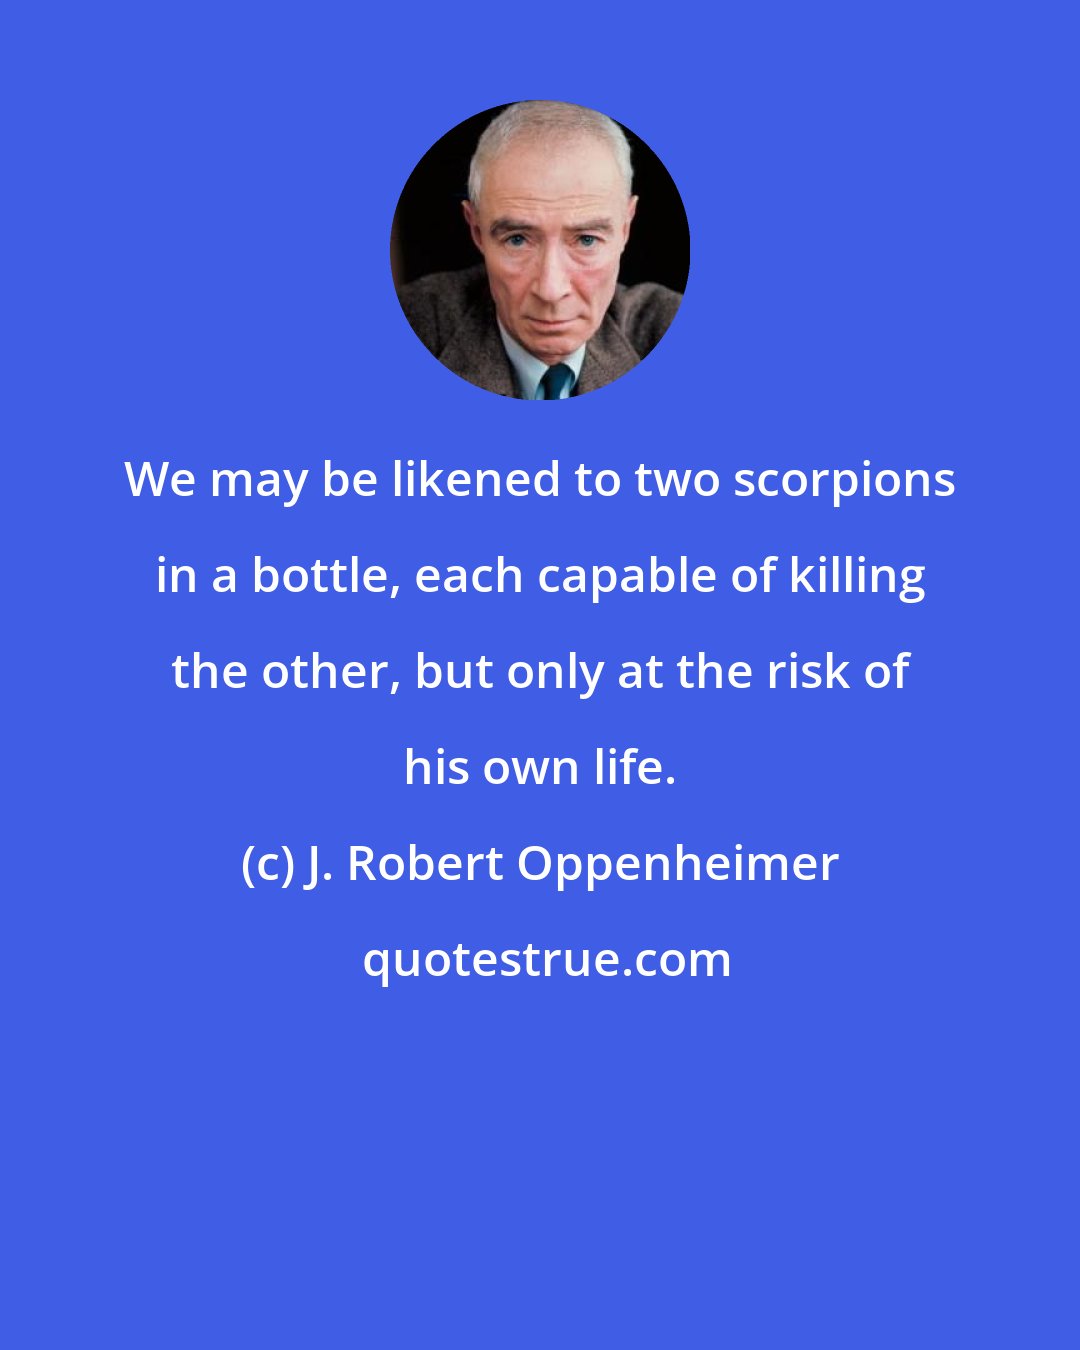 J. Robert Oppenheimer: We may be likened to two scorpions in a bottle, each capable of killing the other, but only at the risk of his own life.